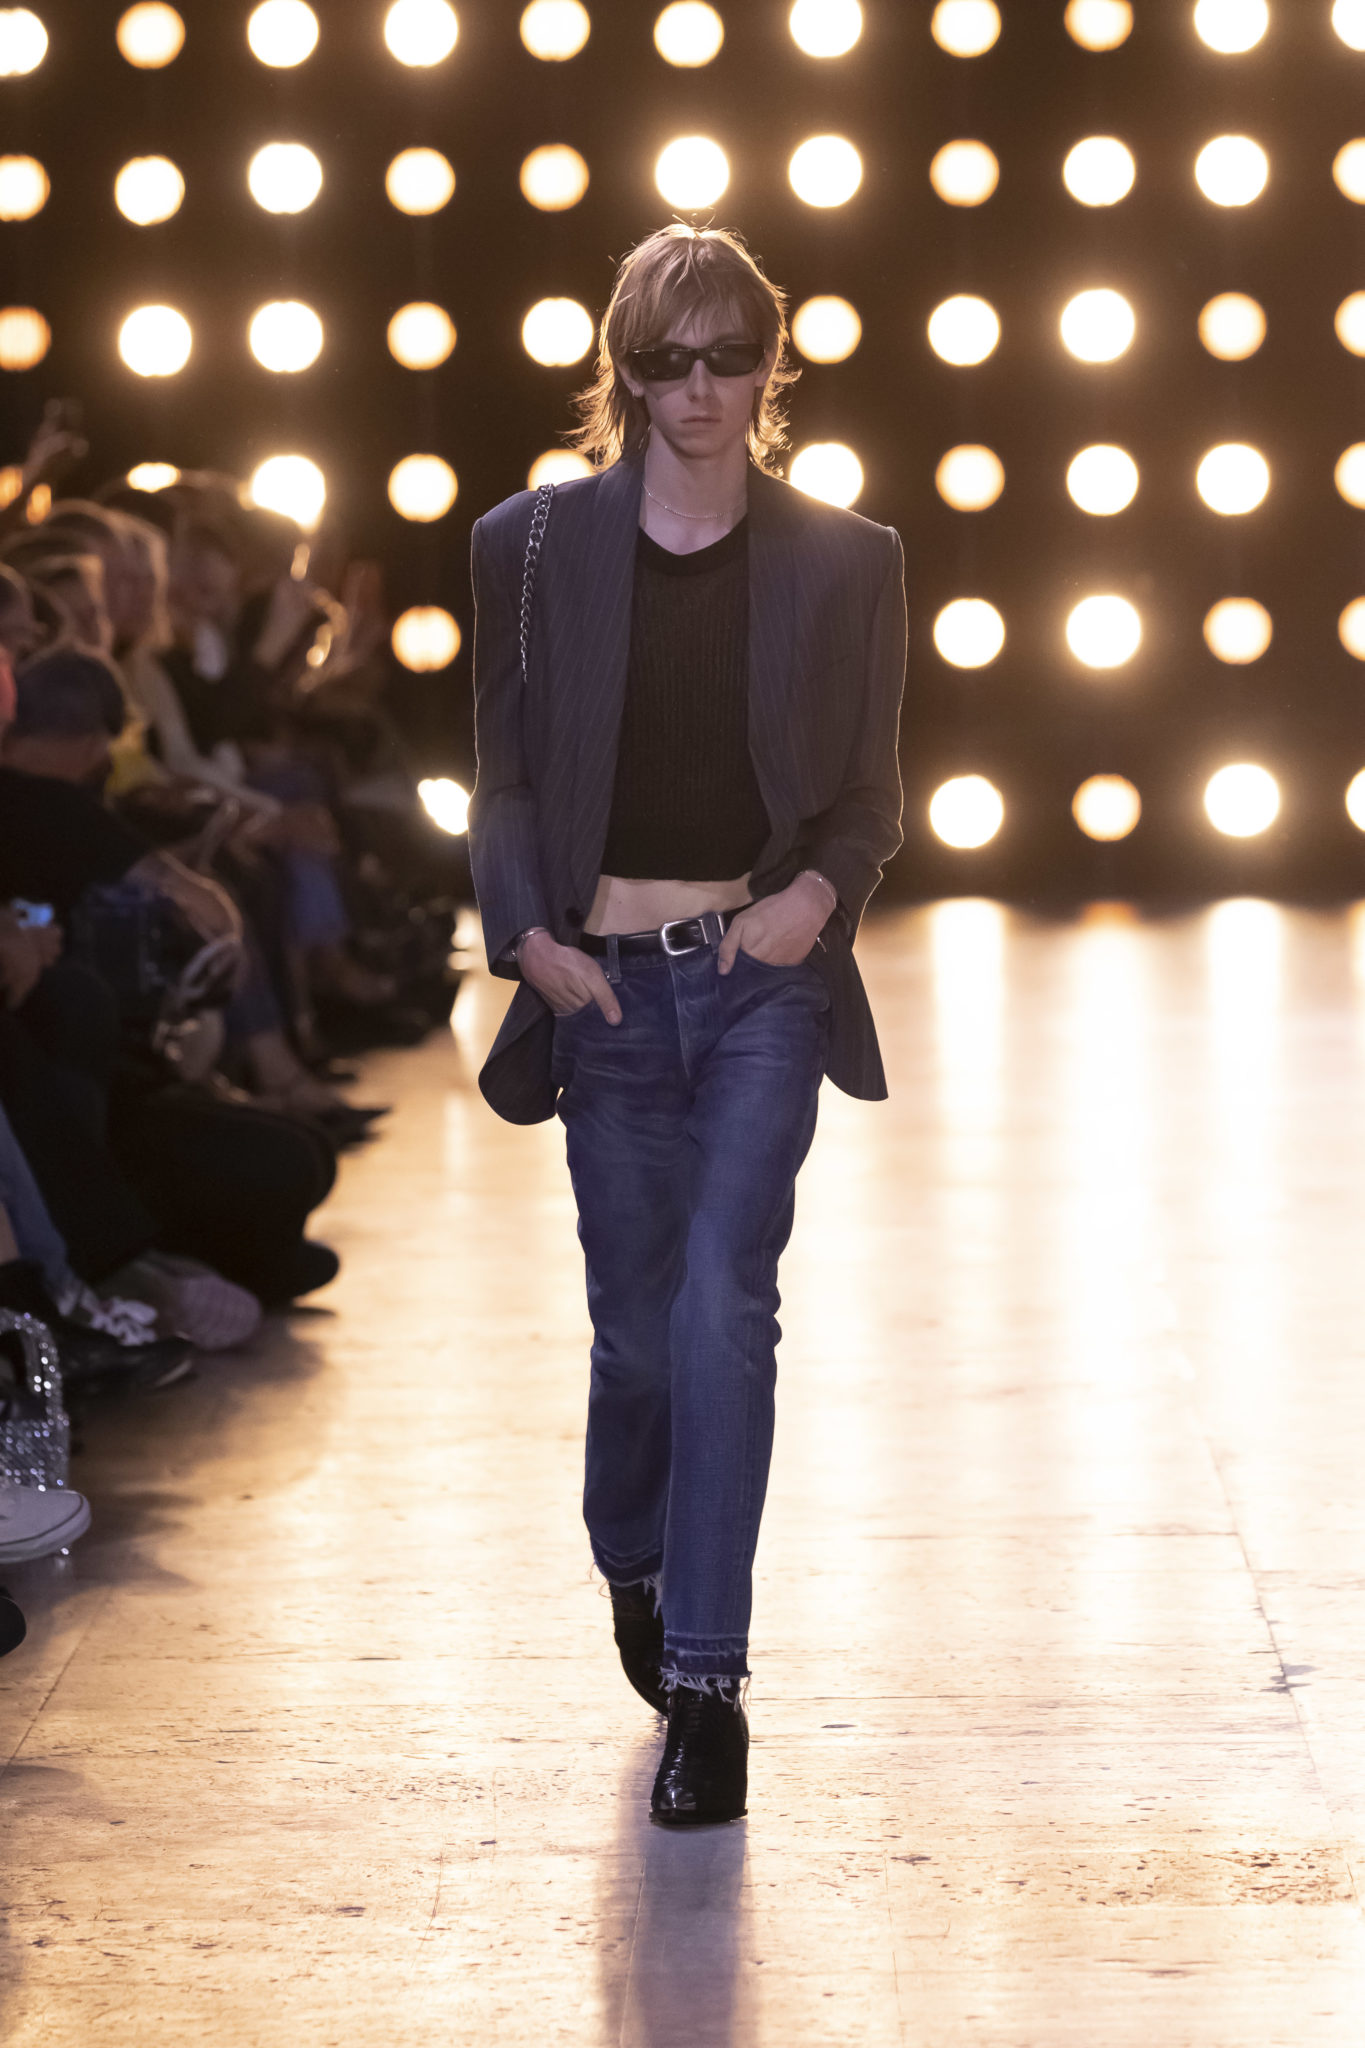 Harry Lambert on Condom Clothes and Natural Wine at Men’s Fashion Week